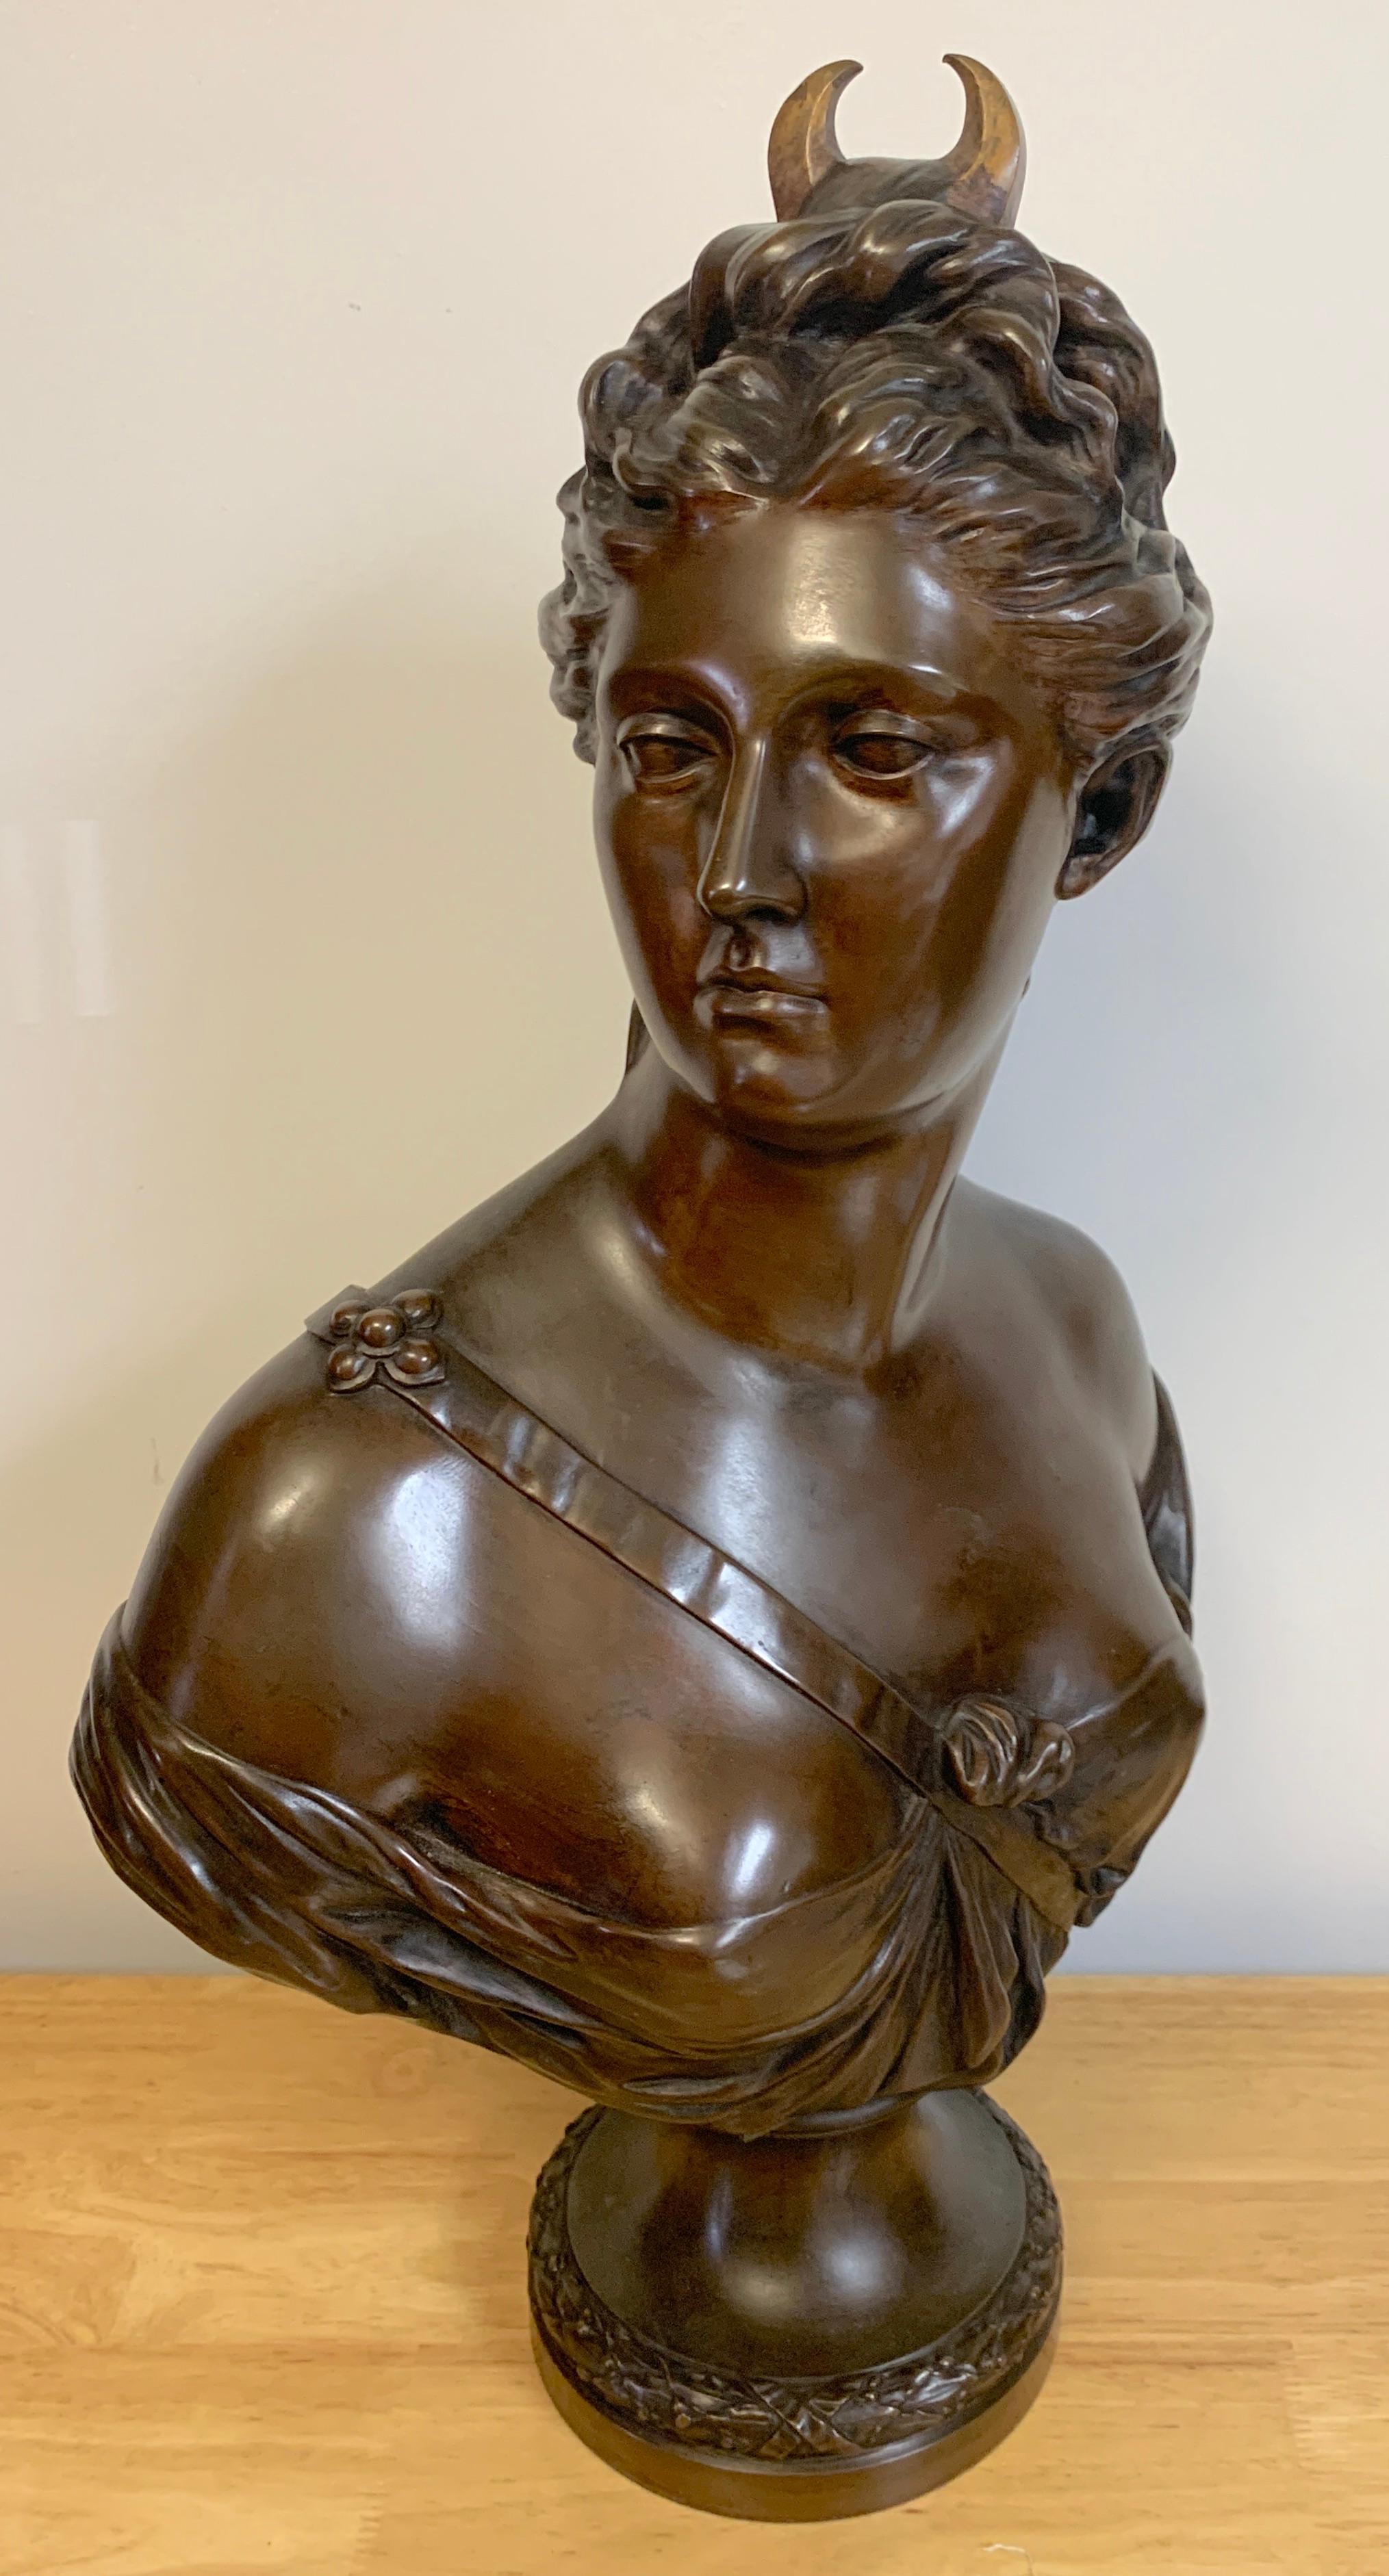 French Bronze Bust of Diana the Huntress, after Houdon, by Susse Frère Foundry
A Exquisite 3/4 bust of the original work by Jean-Antonie Houdon (1741-1828)
Her hair entwined around a crescent moon and wearing a sash with a sash across her chest.